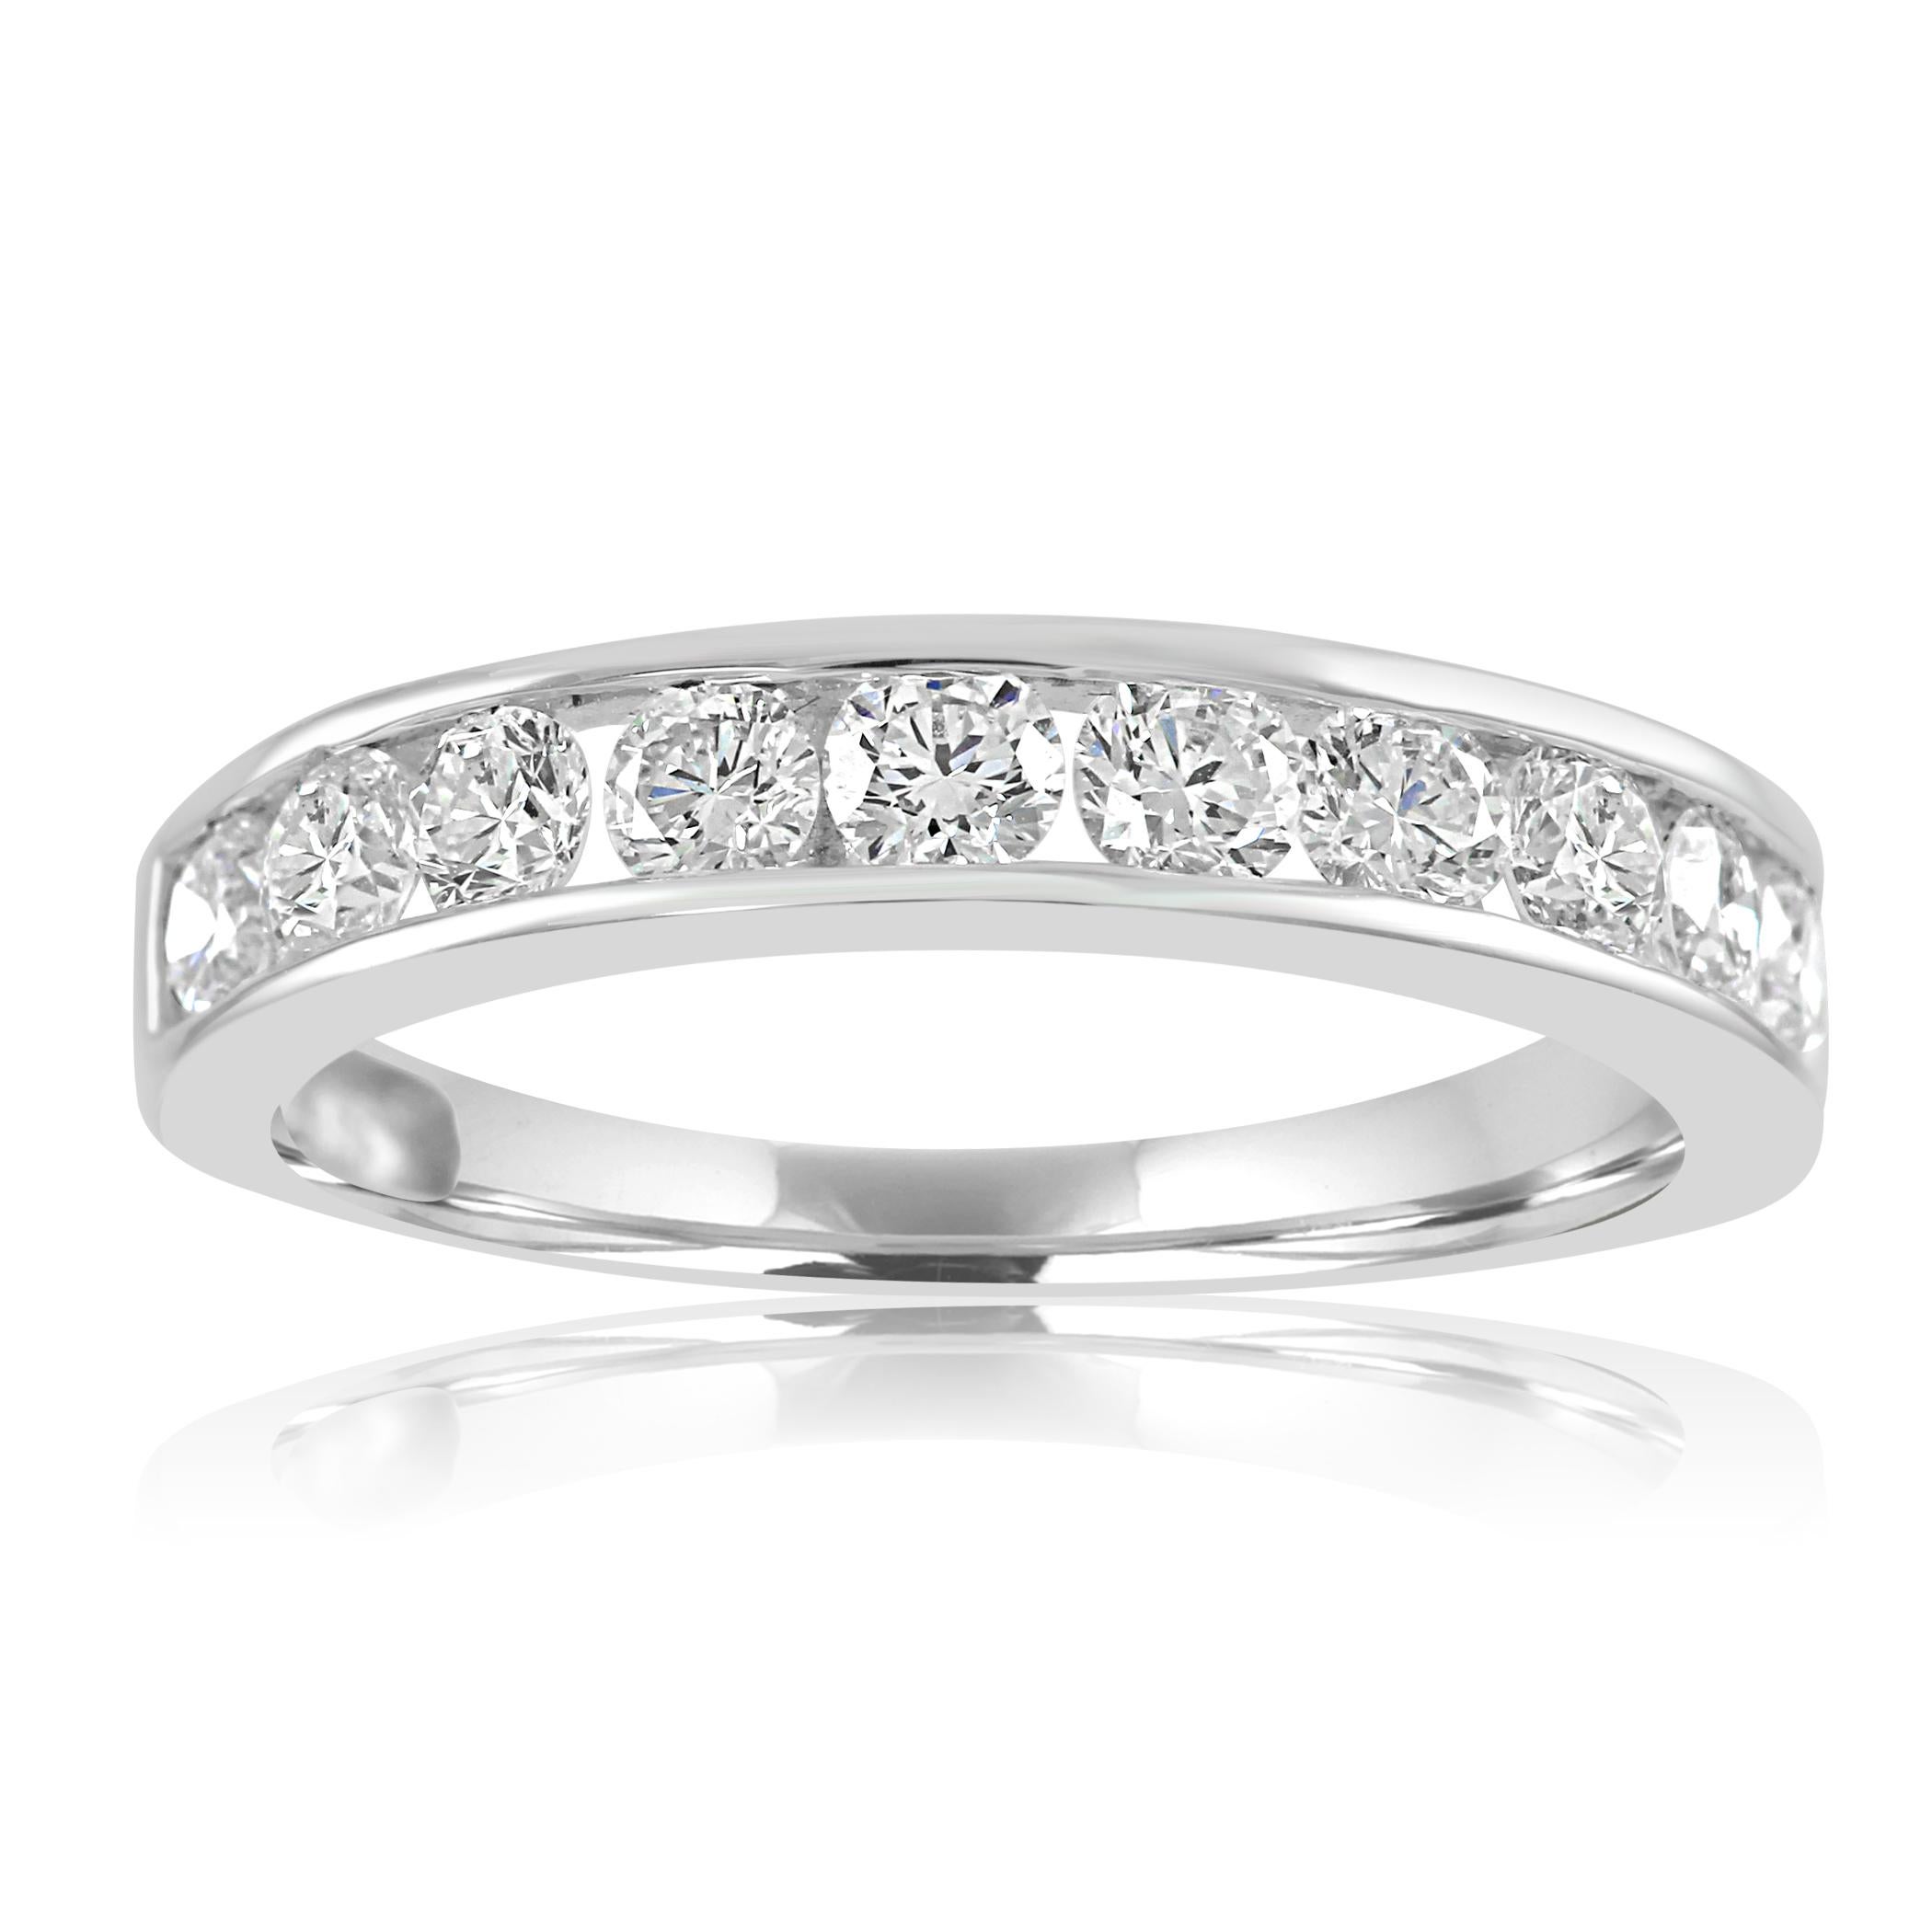 A True Classic 11 White Diamond Rounds GH Color VS-SI Clarity 1.00 Carat Channel set in 14k White gold Bridal Fashion Cocktail Band Ring.

Style available in different price ranges. Prices are based on your selection of 4C's Cut, Color, Carat,